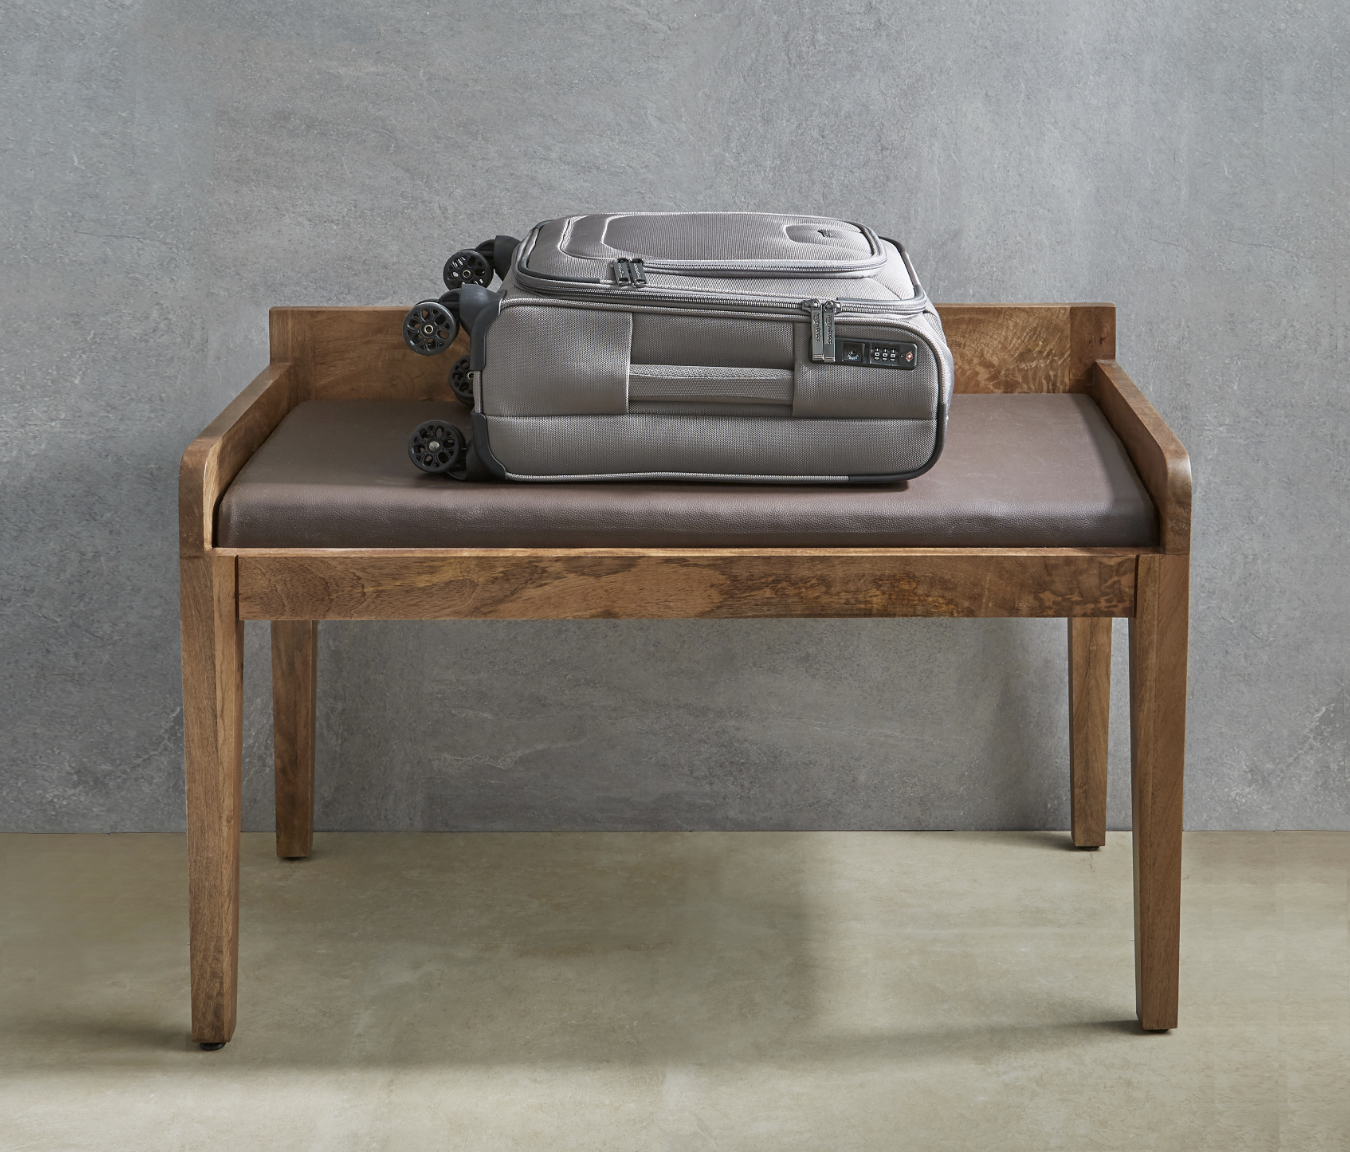 The Bassa unit doubles as a luggage storage bench